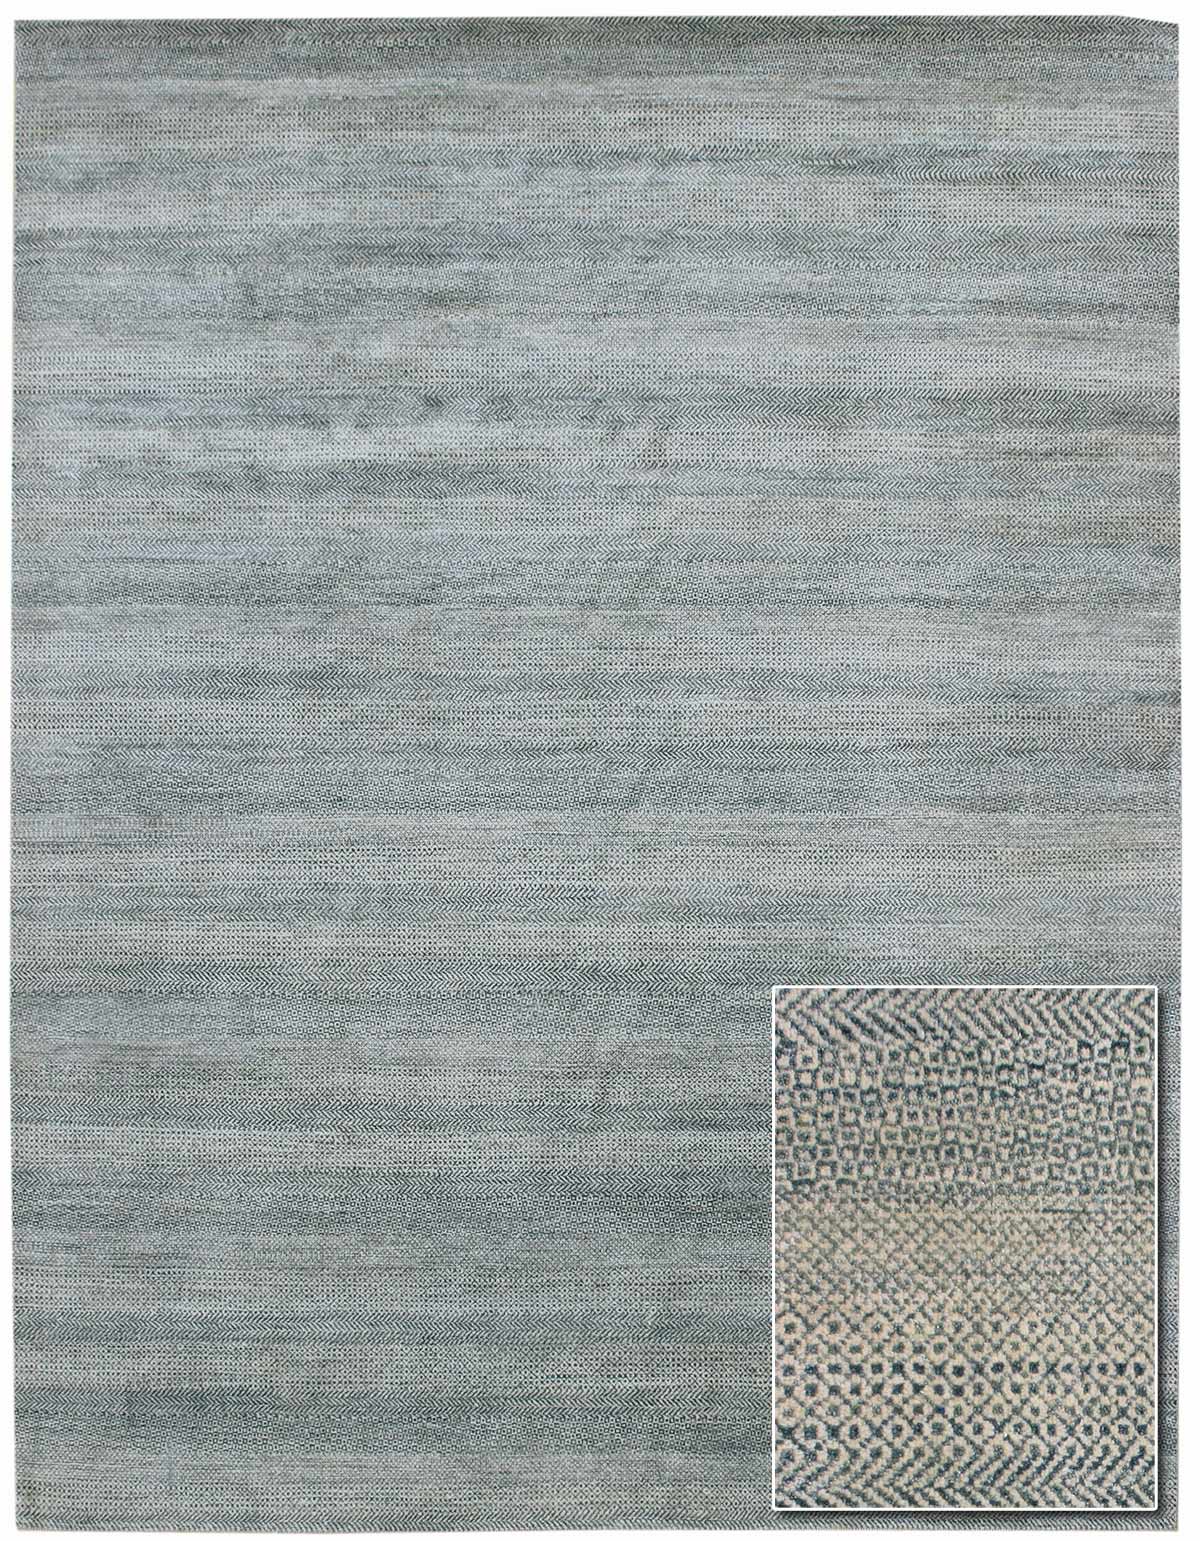 Illusion Nomad Handwoven Contemporary Rug